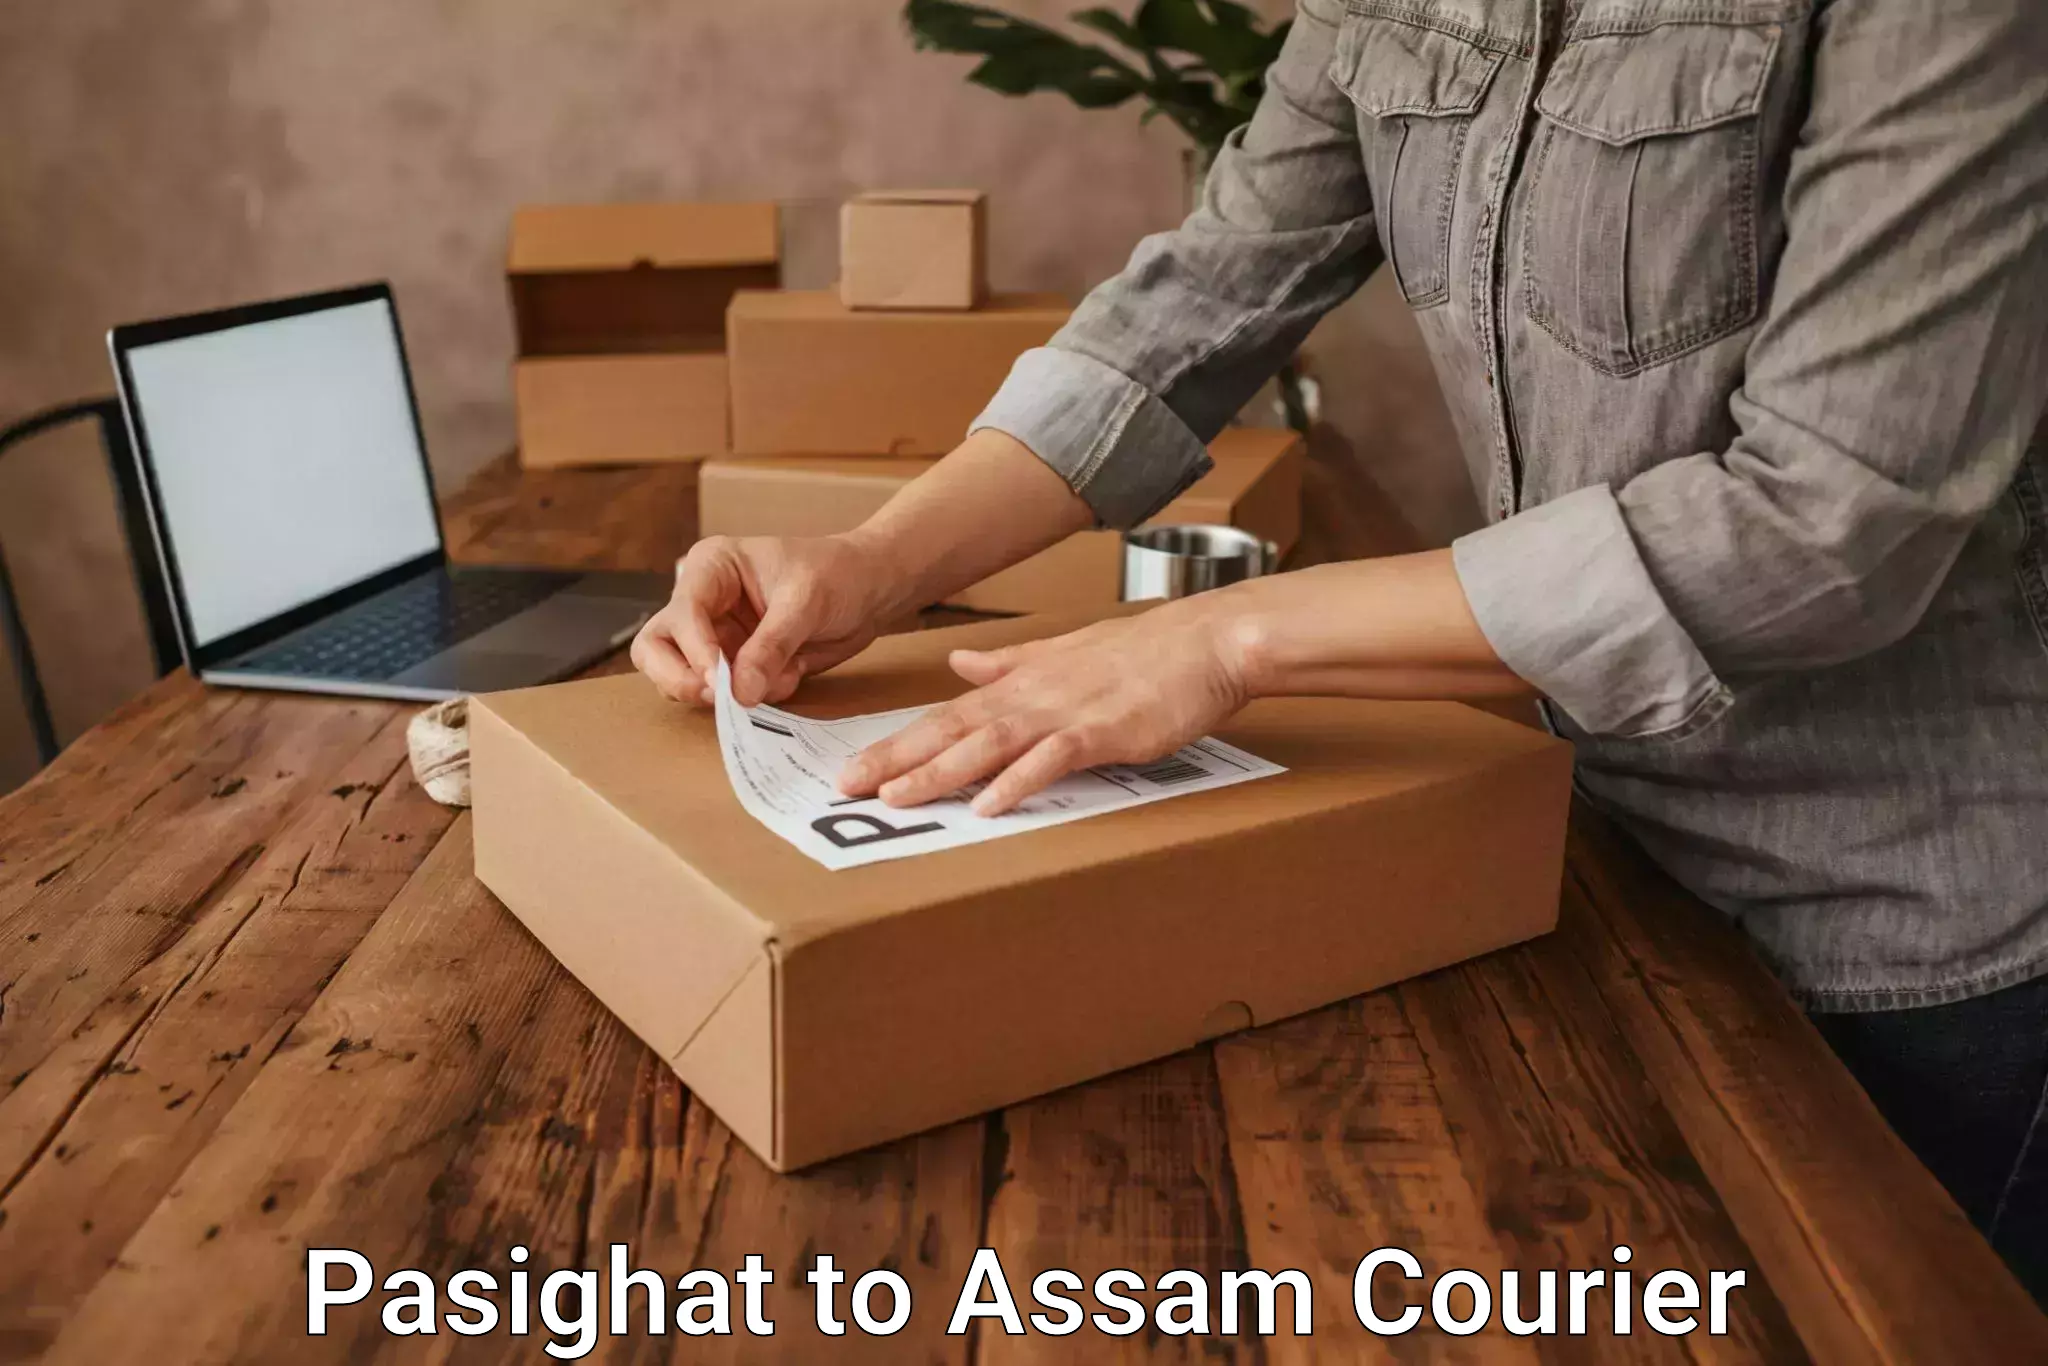 Supply chain efficiency in Pasighat to Biswanath